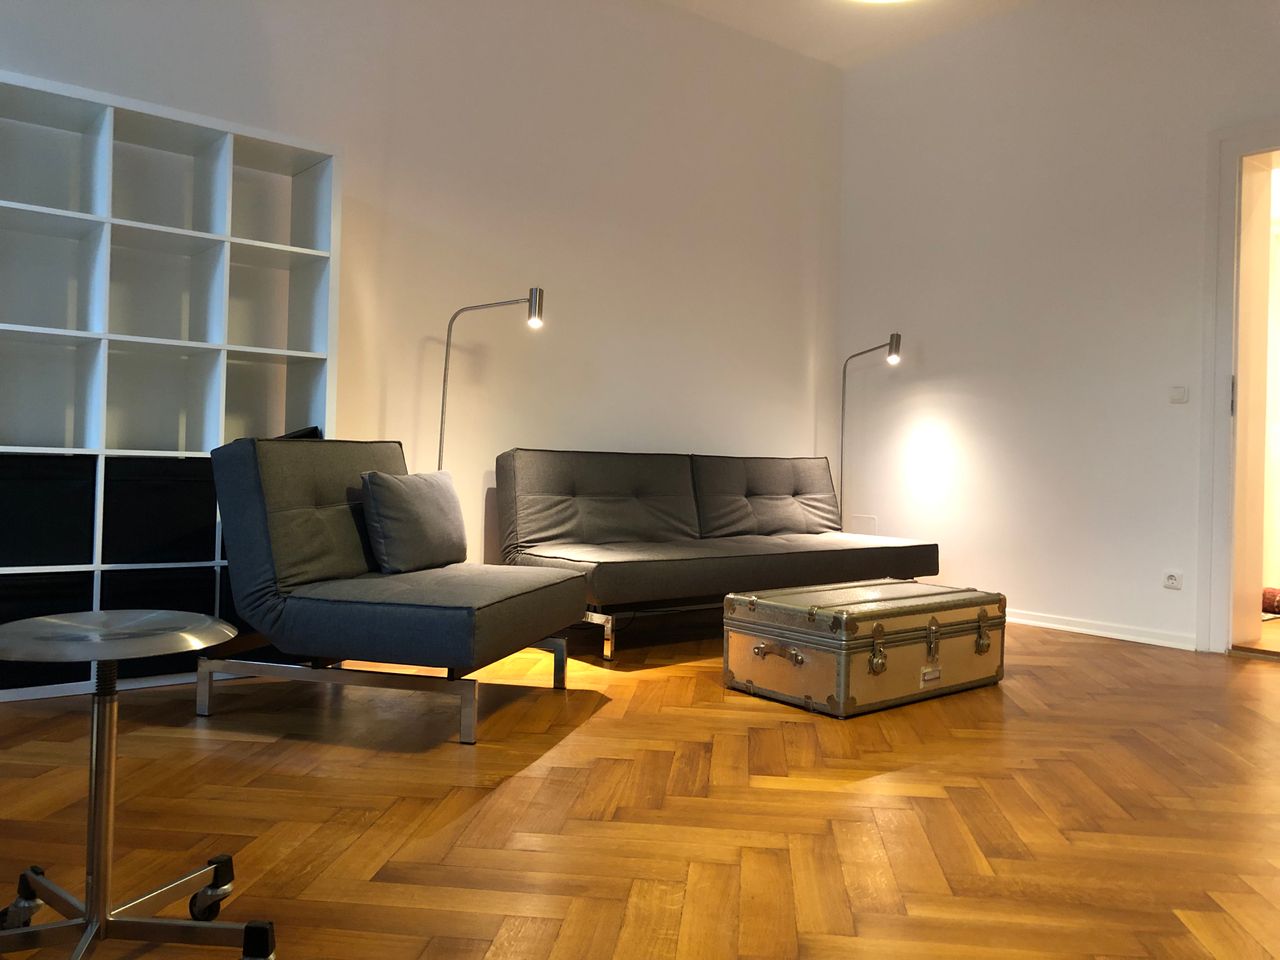 Top newly renovated flat in the Glockenbach quarters